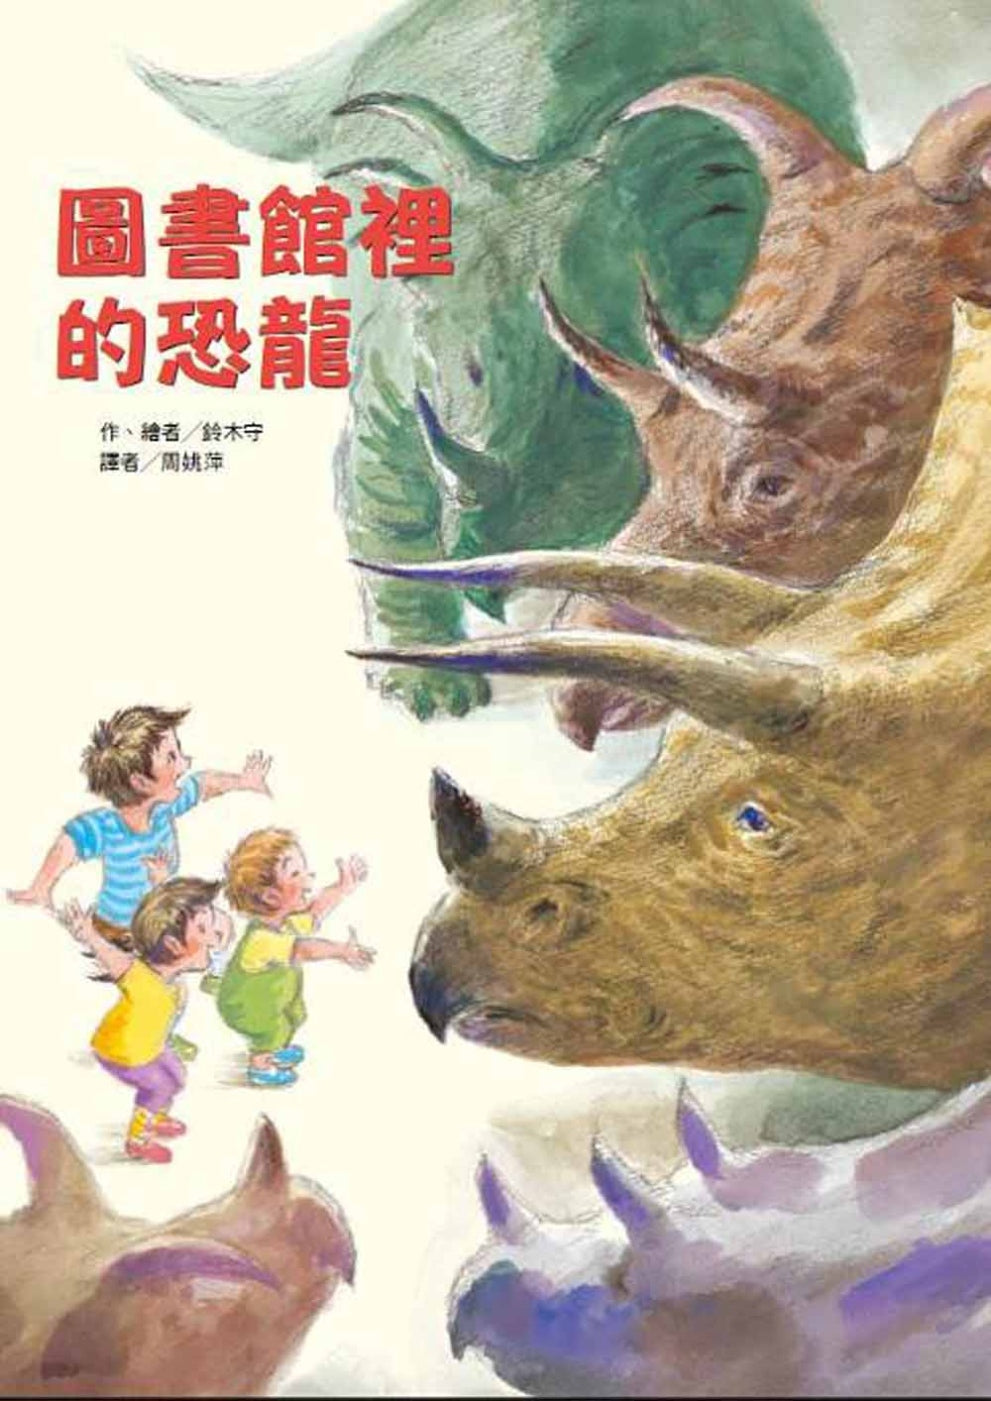 The Dinosaurs at the Library • 圖書館裡的恐龍